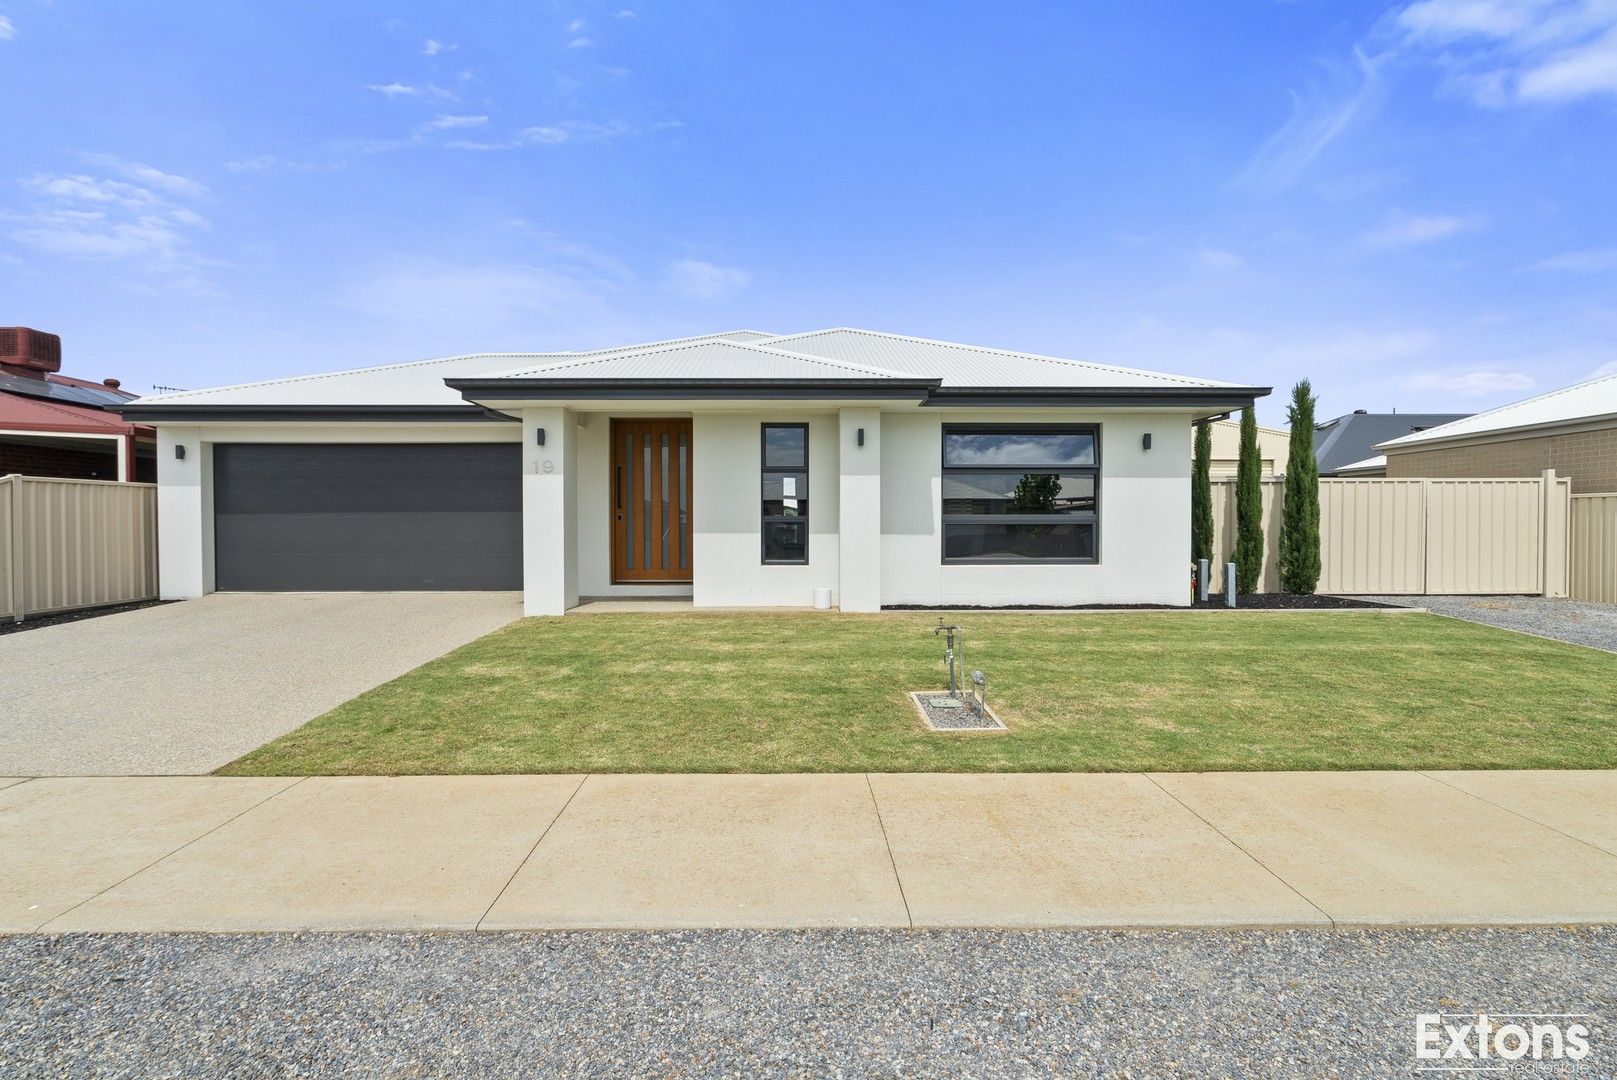 3 bedrooms House in 19 Alexander Street YARRAWONGA VIC, 3730